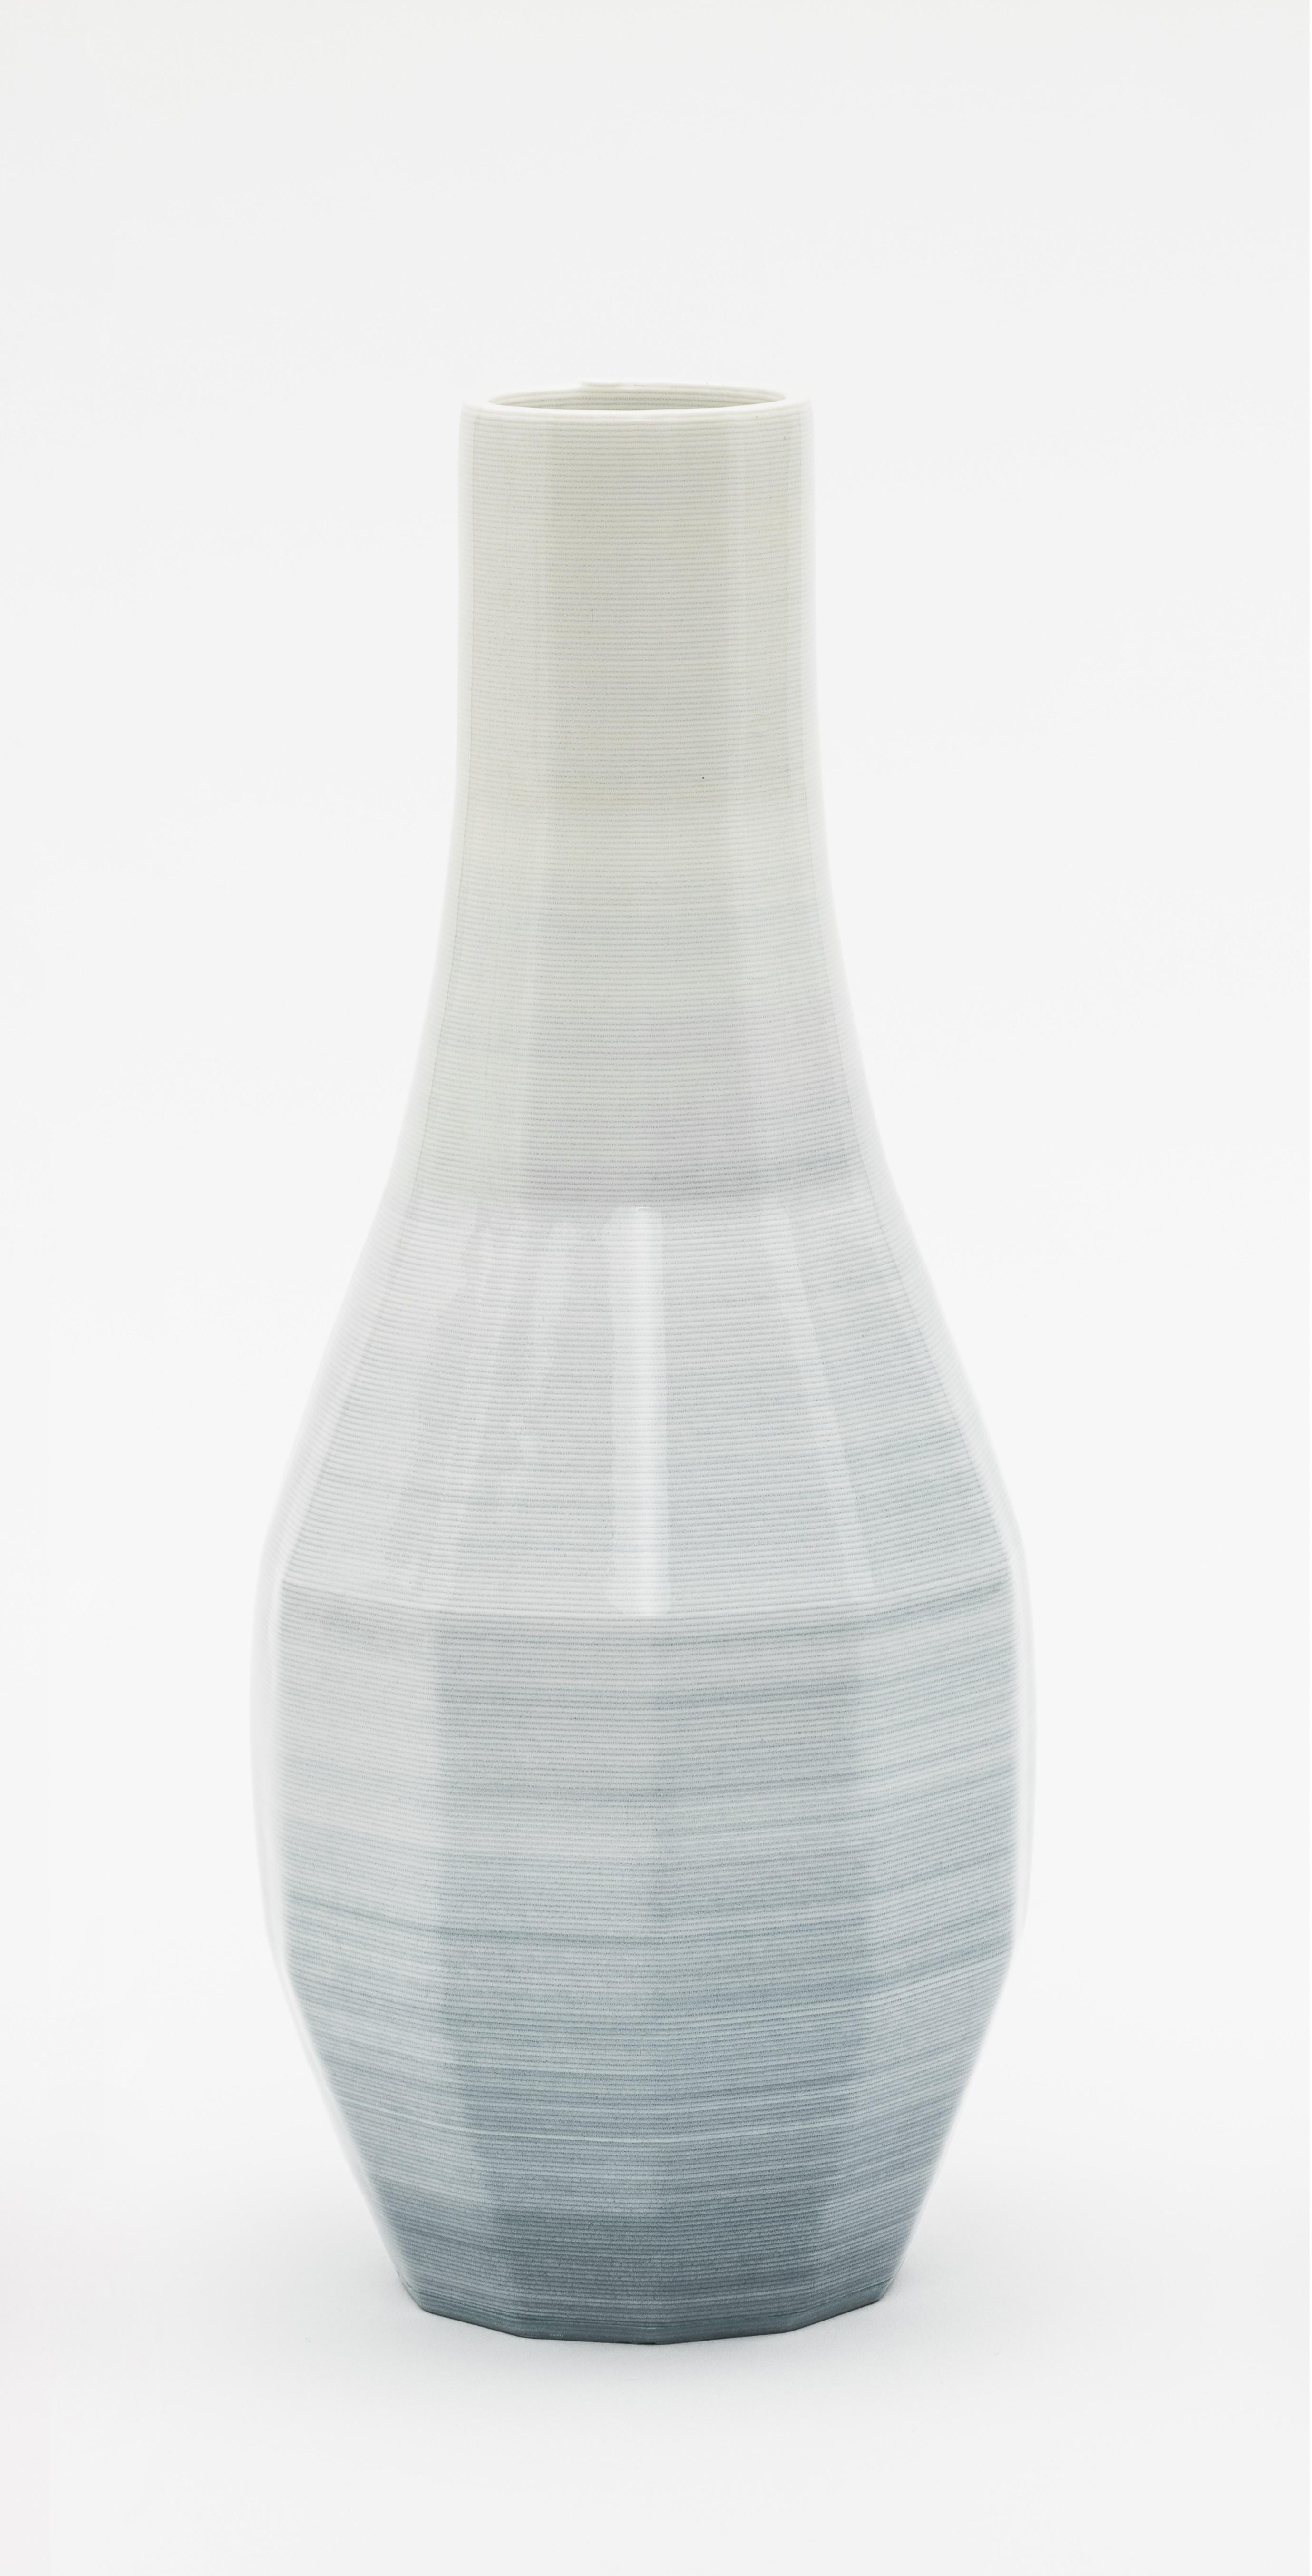 Small porcelain gradient vase by Philipp Aduatz
Unique piece 
Dimensions: 11 x 11 x 26,5 cm
Materials: 3D printed porcelain

 
The inspiration and tool for the design of the Gradient Vase was subdivision modelling, a computer graphics